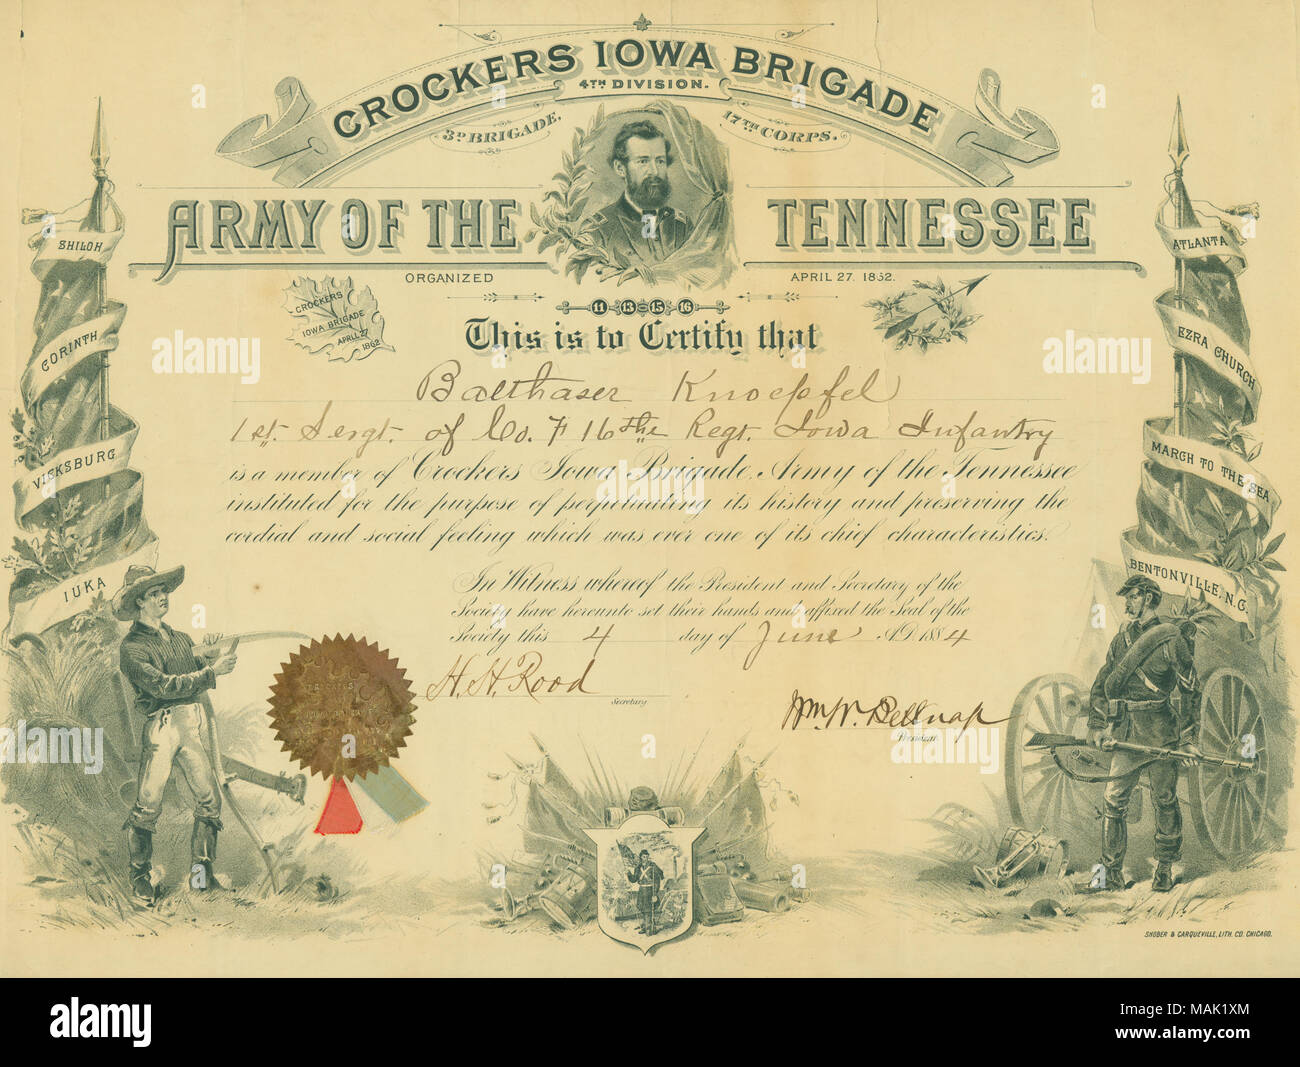 Certificate with an image of a farmer on the left next to a flag with the names of battles on it and an image of a soldier next to a cannon and a flag with the names of battles on it. Certificate reads: 'CROCKERS IOWA BRIGADE 3D BRIGADE 4TH DIVISION 17TH CORPS. ARMY OF THE TENNESSEE ORGANIZED APRIL 27, 1862 This is to Certify that Balthaser Knoepfel 1st Sergt. Of Co. F 16th Regt. Iowa Infantry is a member of Crockers Iowa Brigade Army of the Tennessee instituted for the purpose of perpetuating its history and preserving the cordial and social feeling which was ever one of its chief characteris Stock Photo